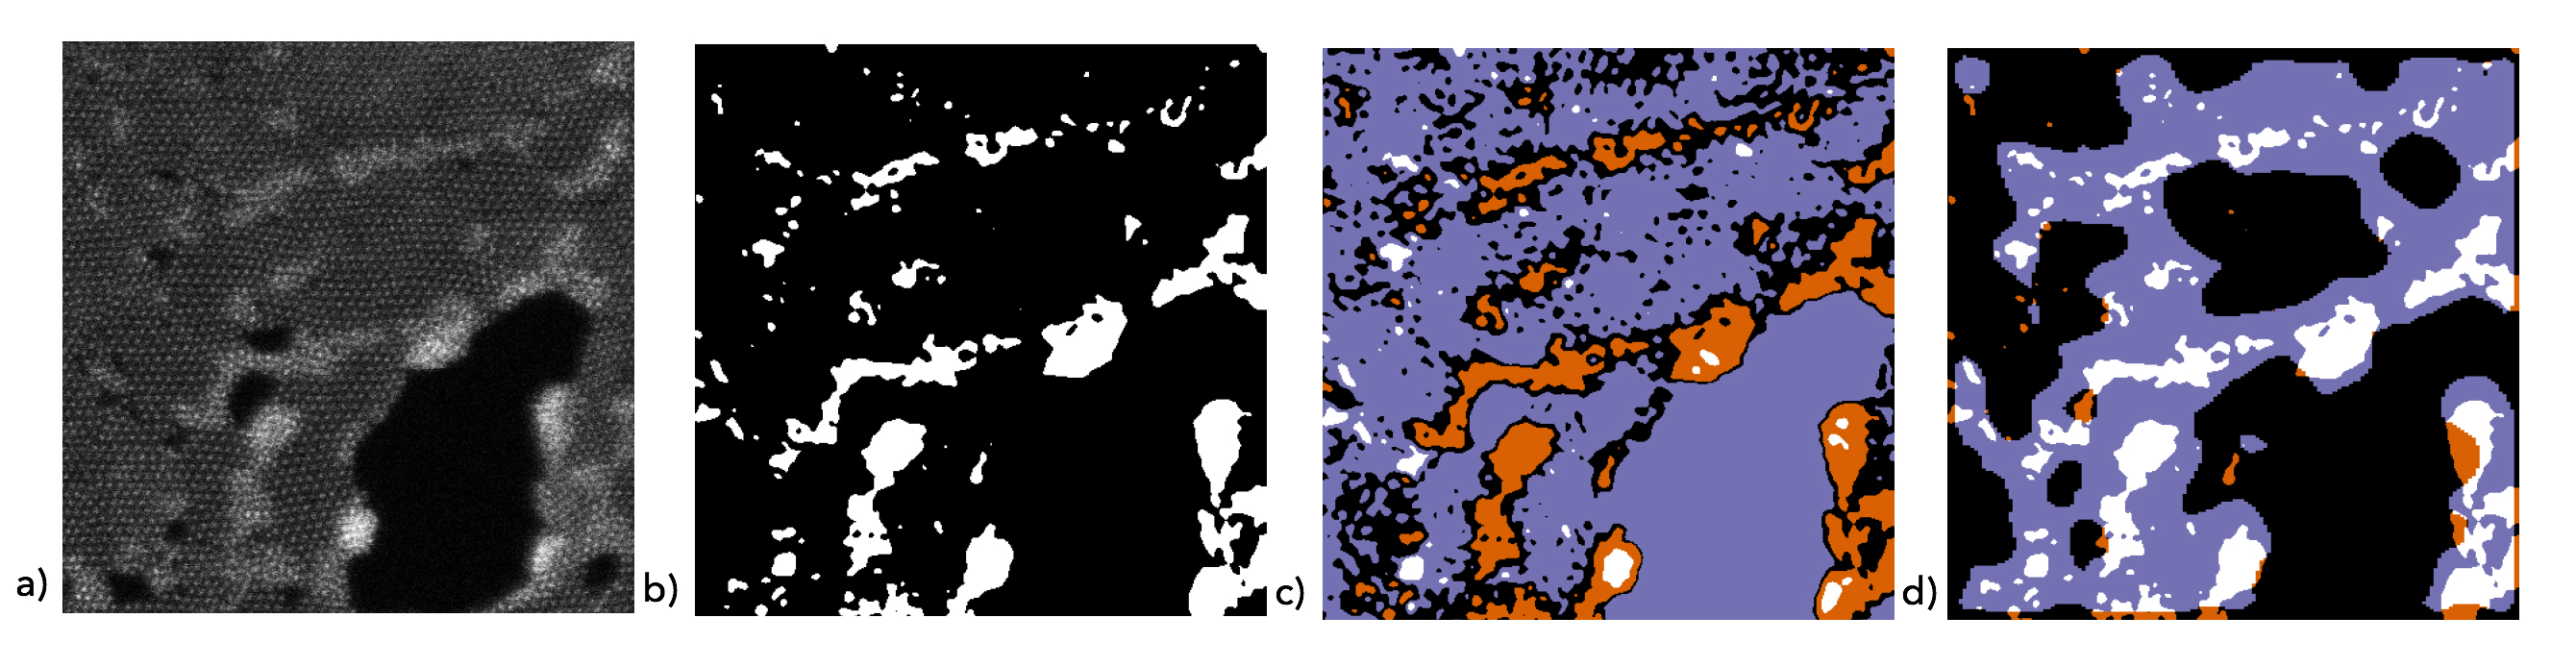 Pictured, the same image shown using different methods of analysis. a) Raw electron microscopy image. b) Image showing defects (white) as labelled by a human expert. c) Image showing defects (white) as labelled by a Fourier transform method, which breaks up an image into its frequency spectrum and requires manual tuning. d) Image showing defects (white) labelled by the optimal neural network. Defects that don’t exist are shown in purple, and defects that weren’t identified are shown in orange. In mere hours, the team created a neural network that performed as well as a human expert, demonstrating MENNDL’s ability to reduce the time to analyze electron microscopy images by months. Image Credit: ORNL